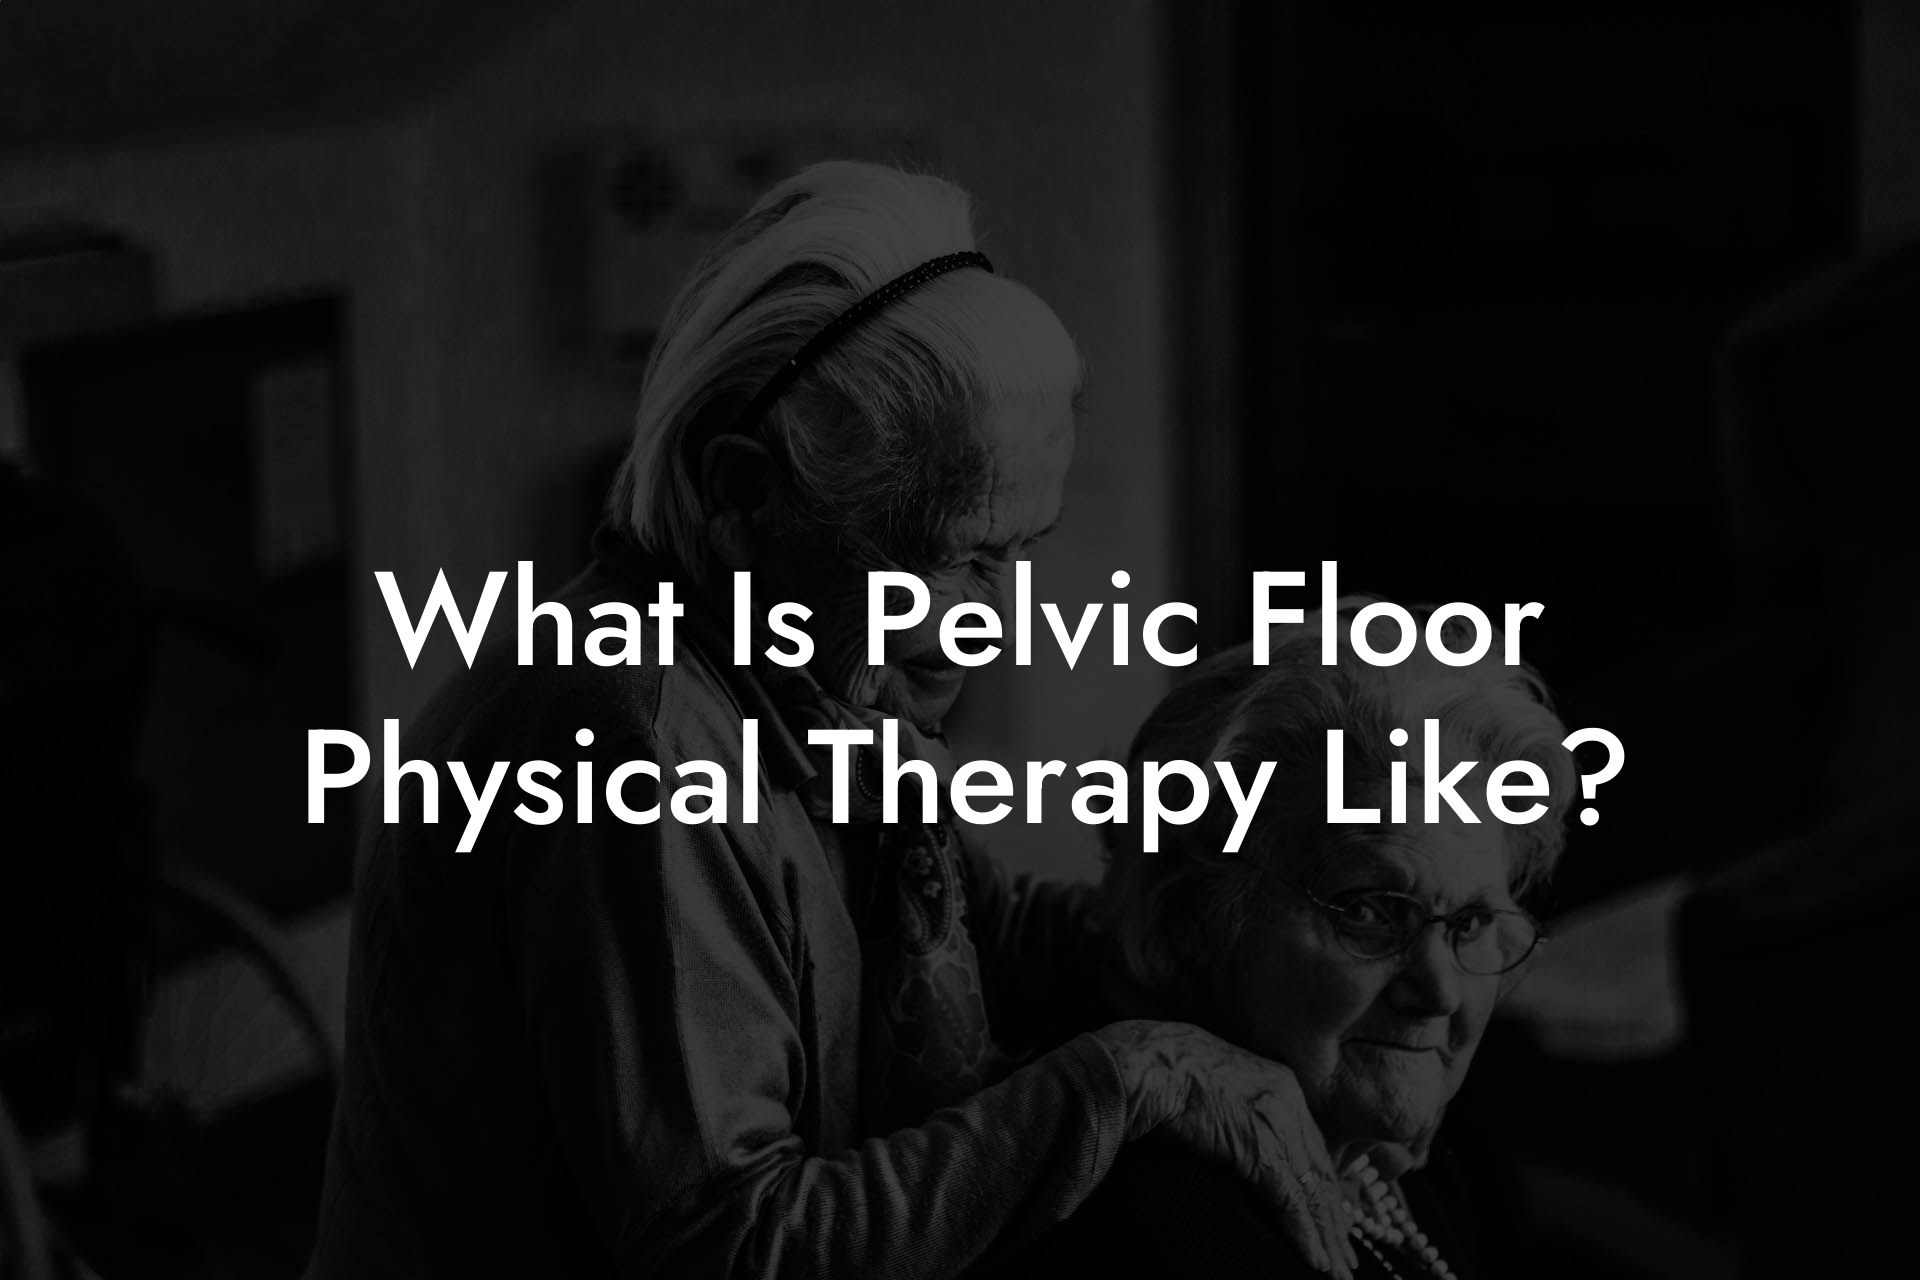 What Is Pelvic Floor Physical Therapy Like?